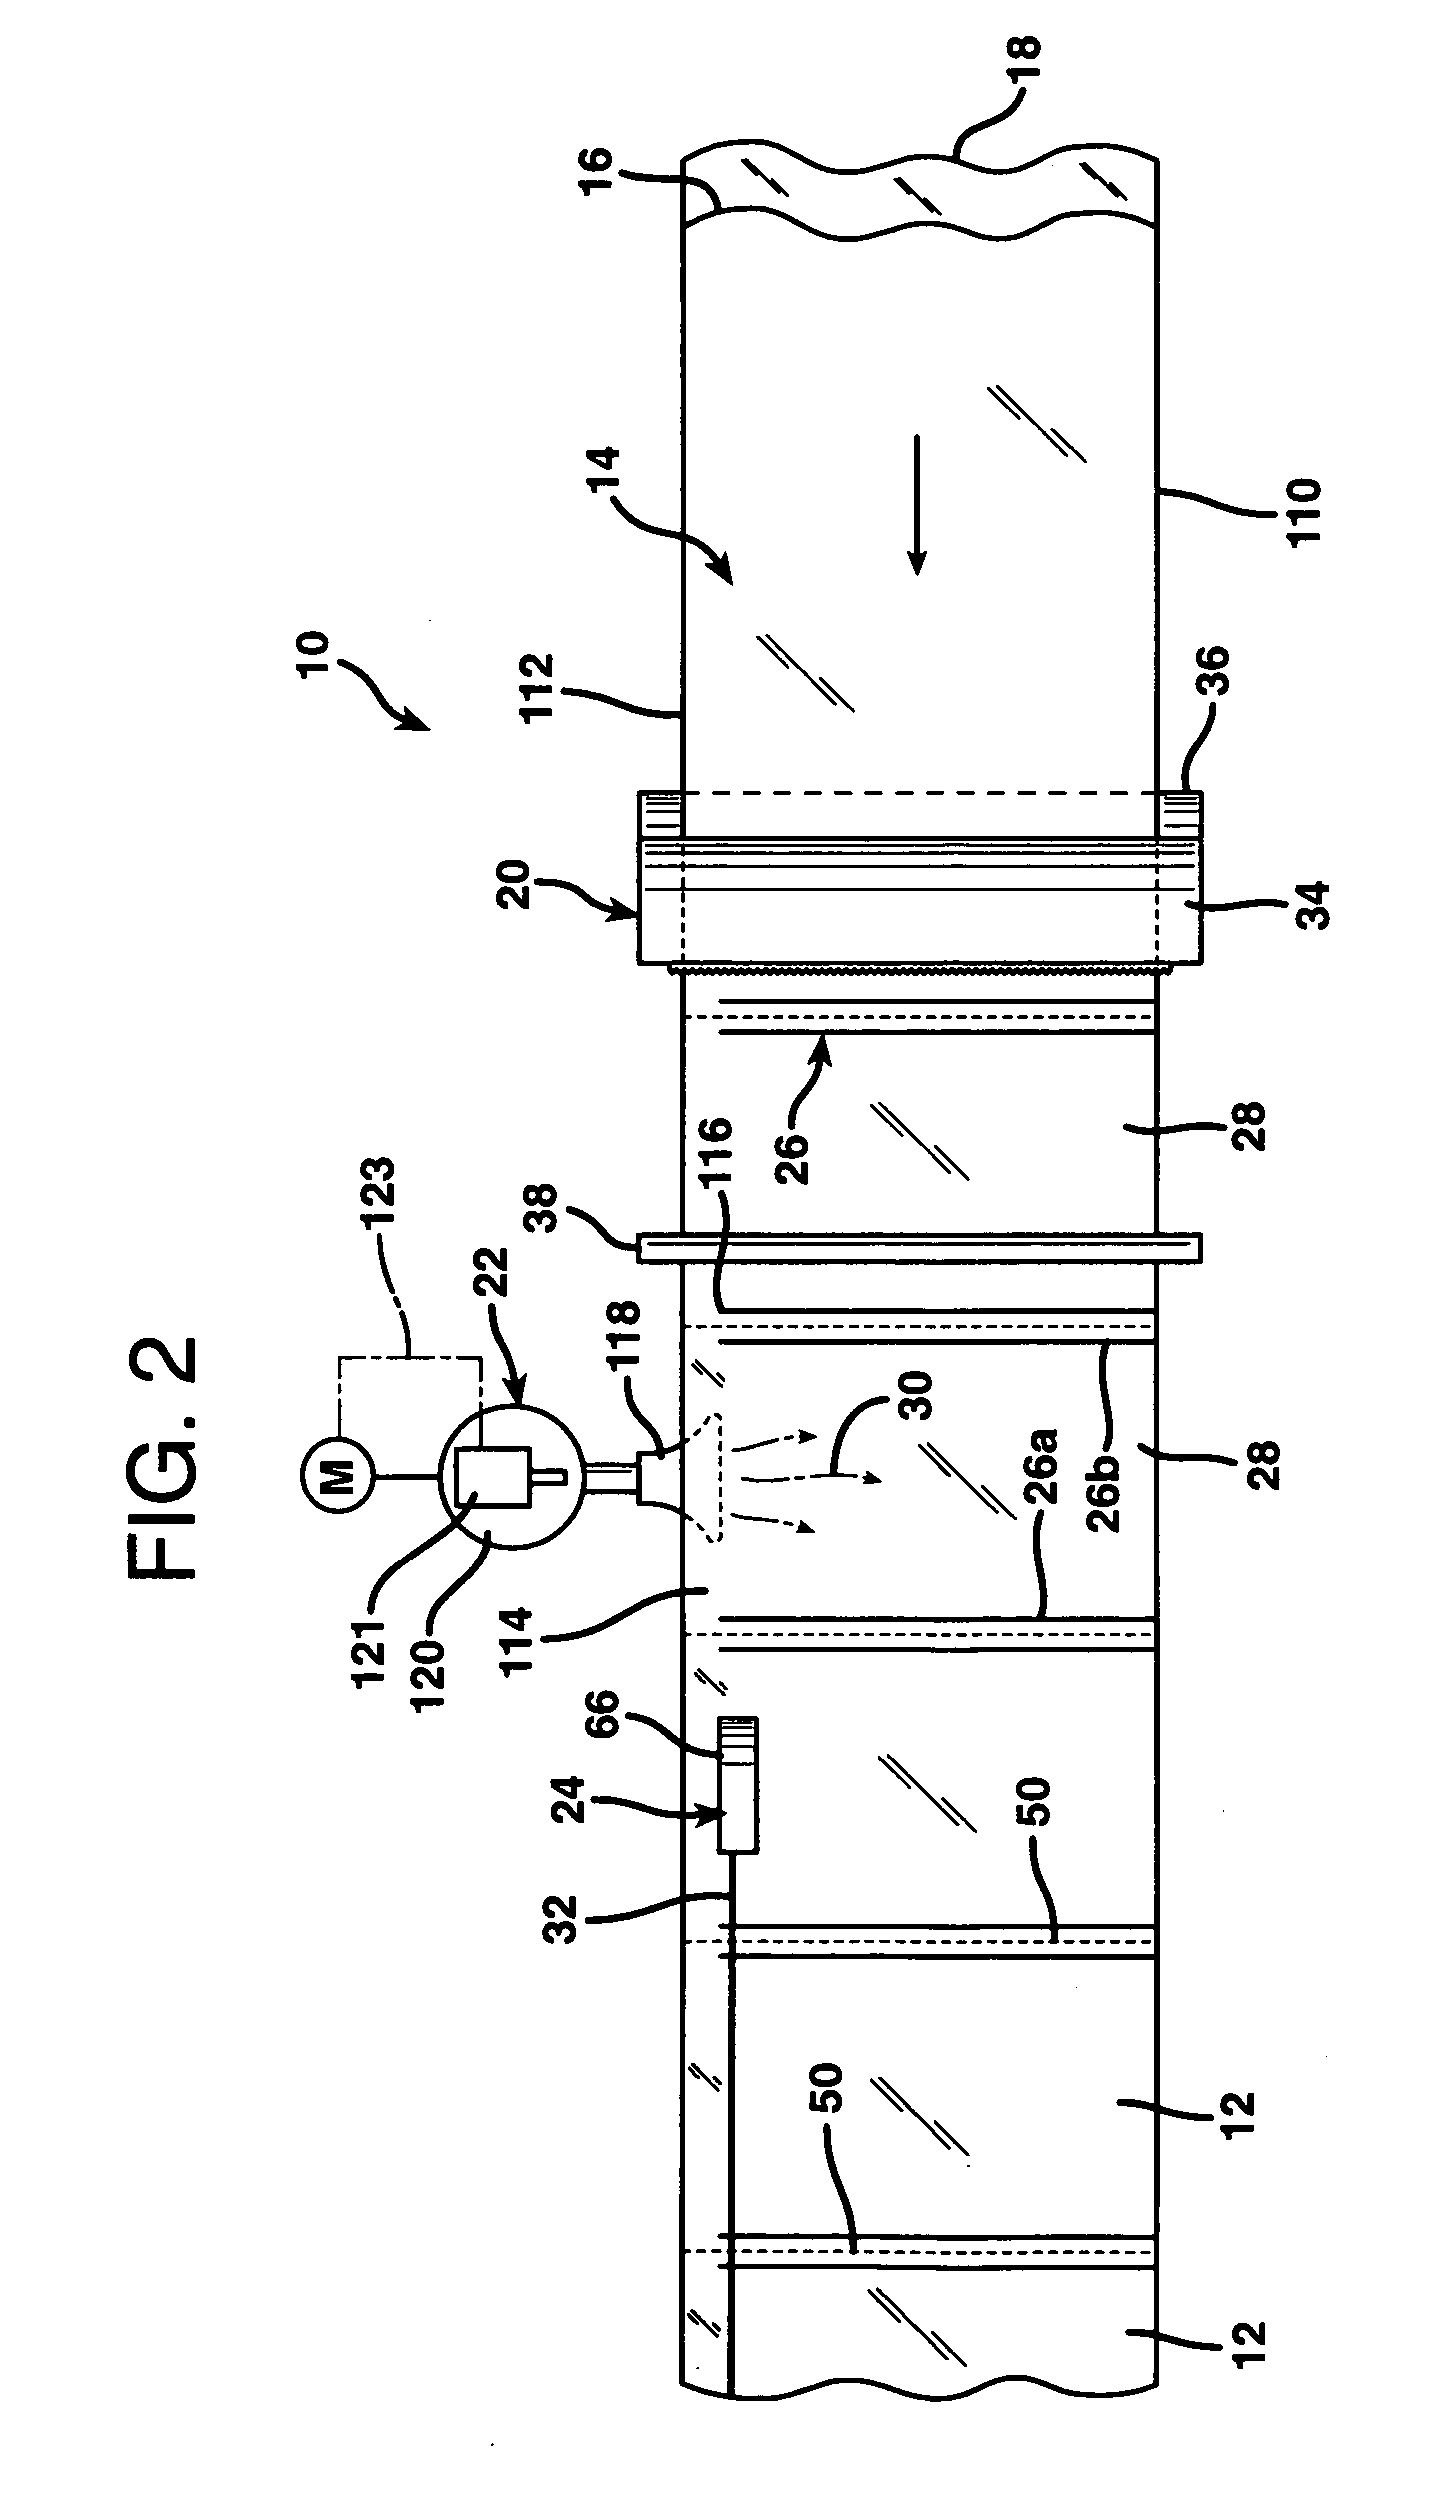 Apparatus and method for forming inflated articles